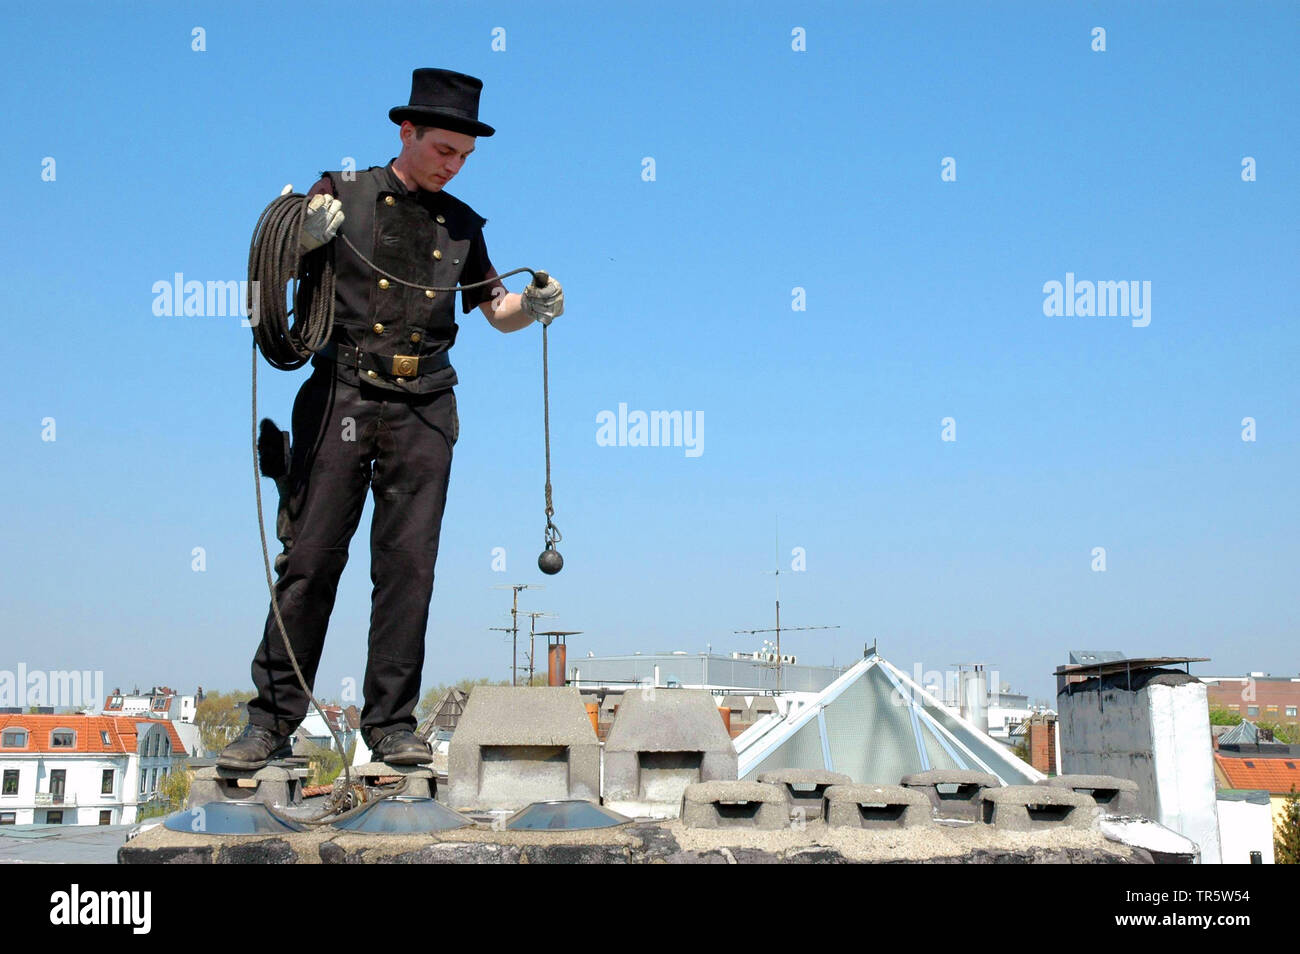 chimney sweeper on a roof, Germany Stock Photo